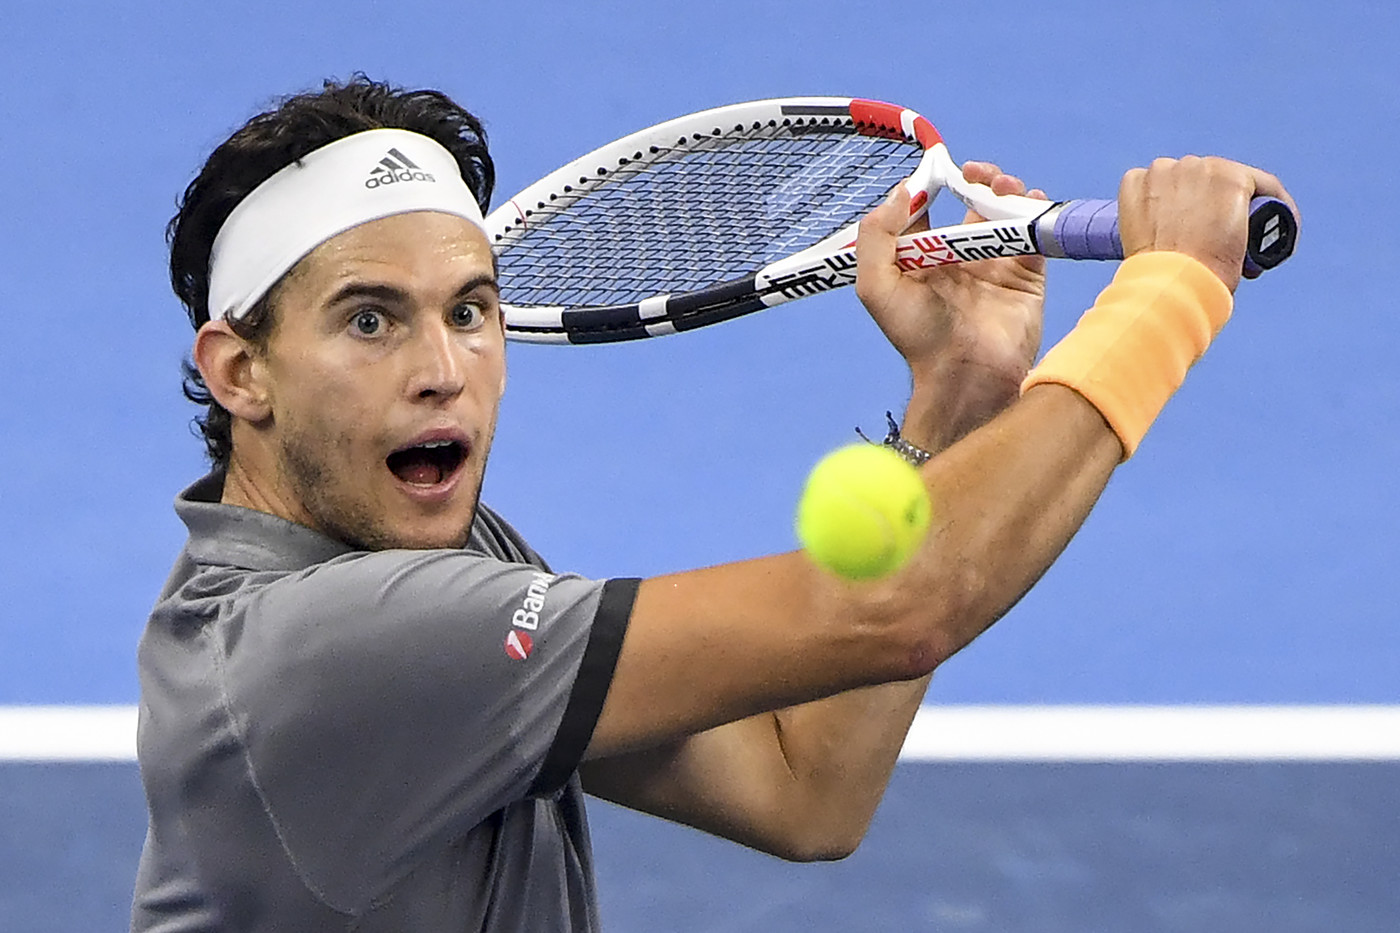 Dominic Thiem of Austria hits a return during his men's singles final match against Stefanos Tsitsipas of Greece at the China Open tennis tournament in Beijing on October 6, 2019.